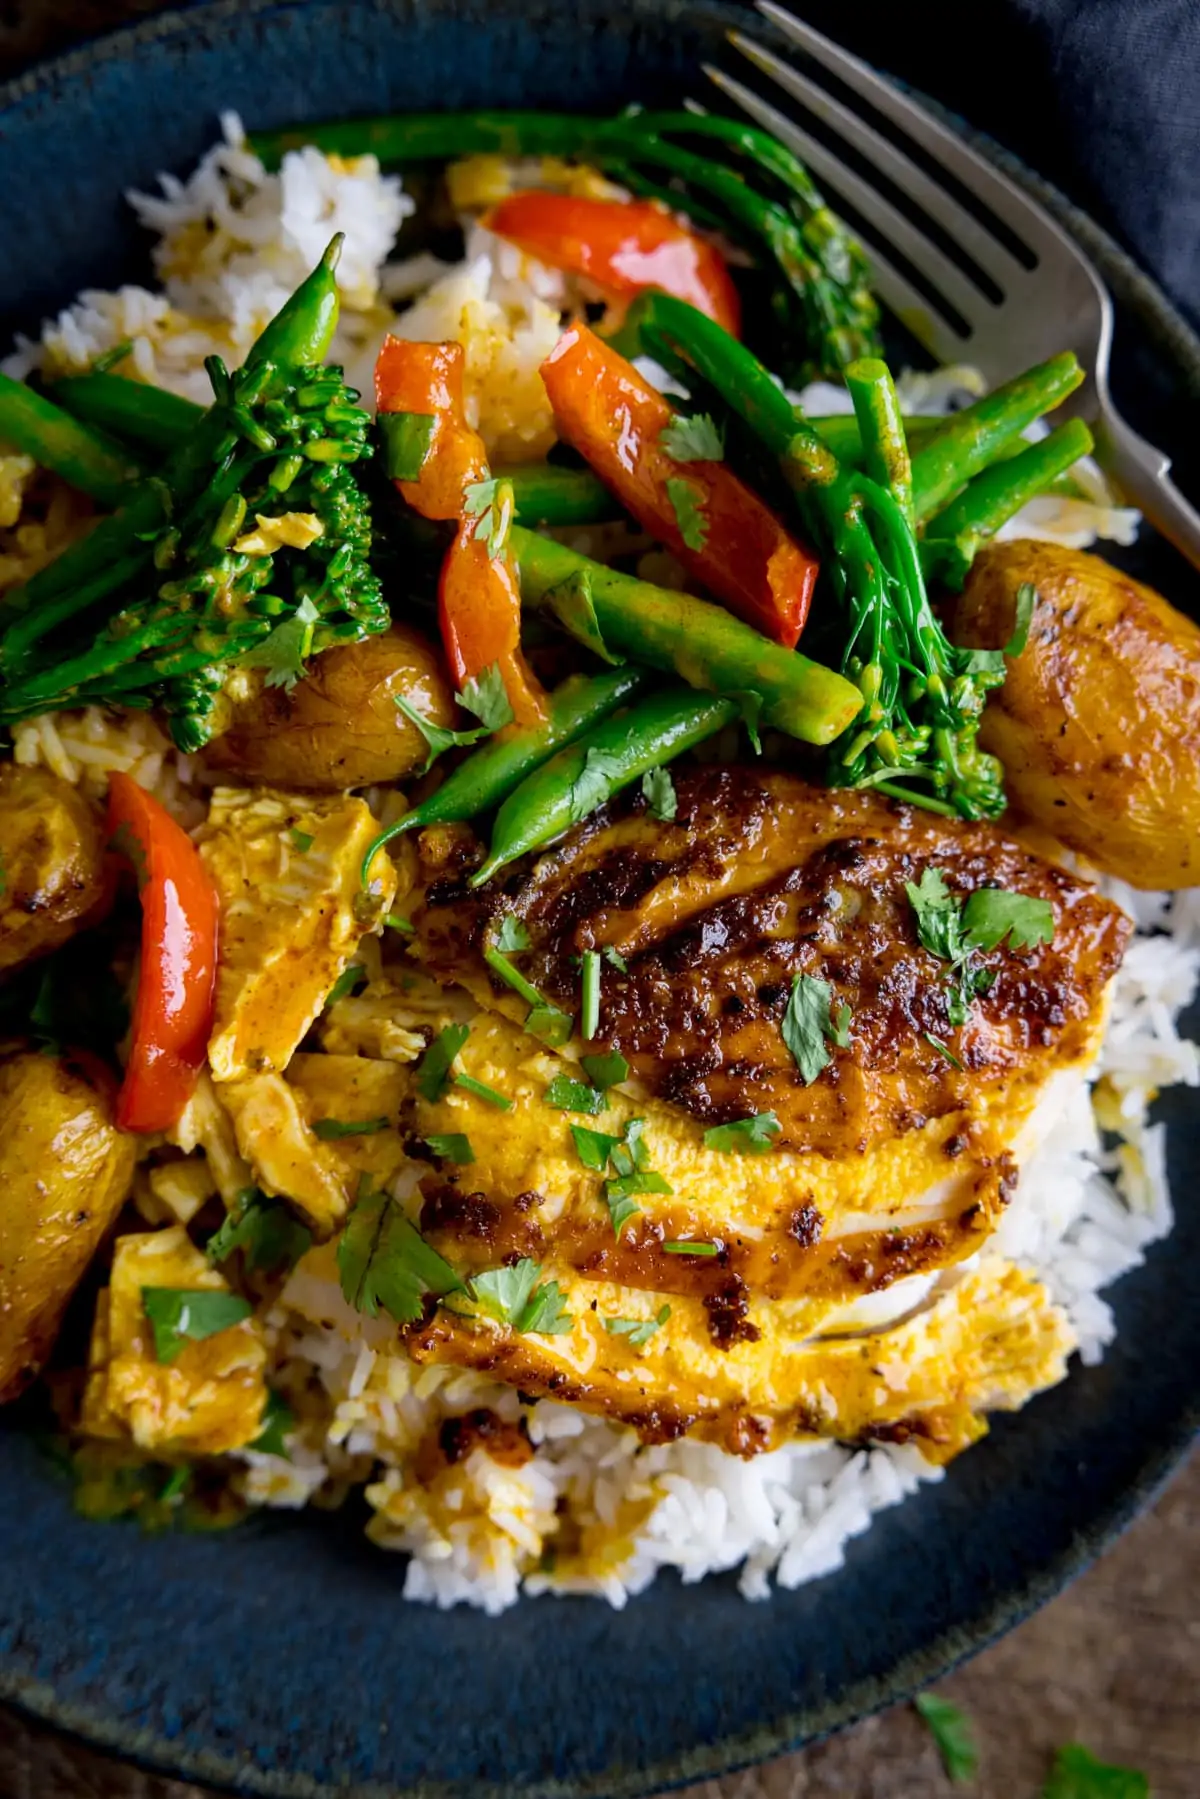 Slices of curry roast chicken on top of boiled rice with vegetables, all on a dark plate